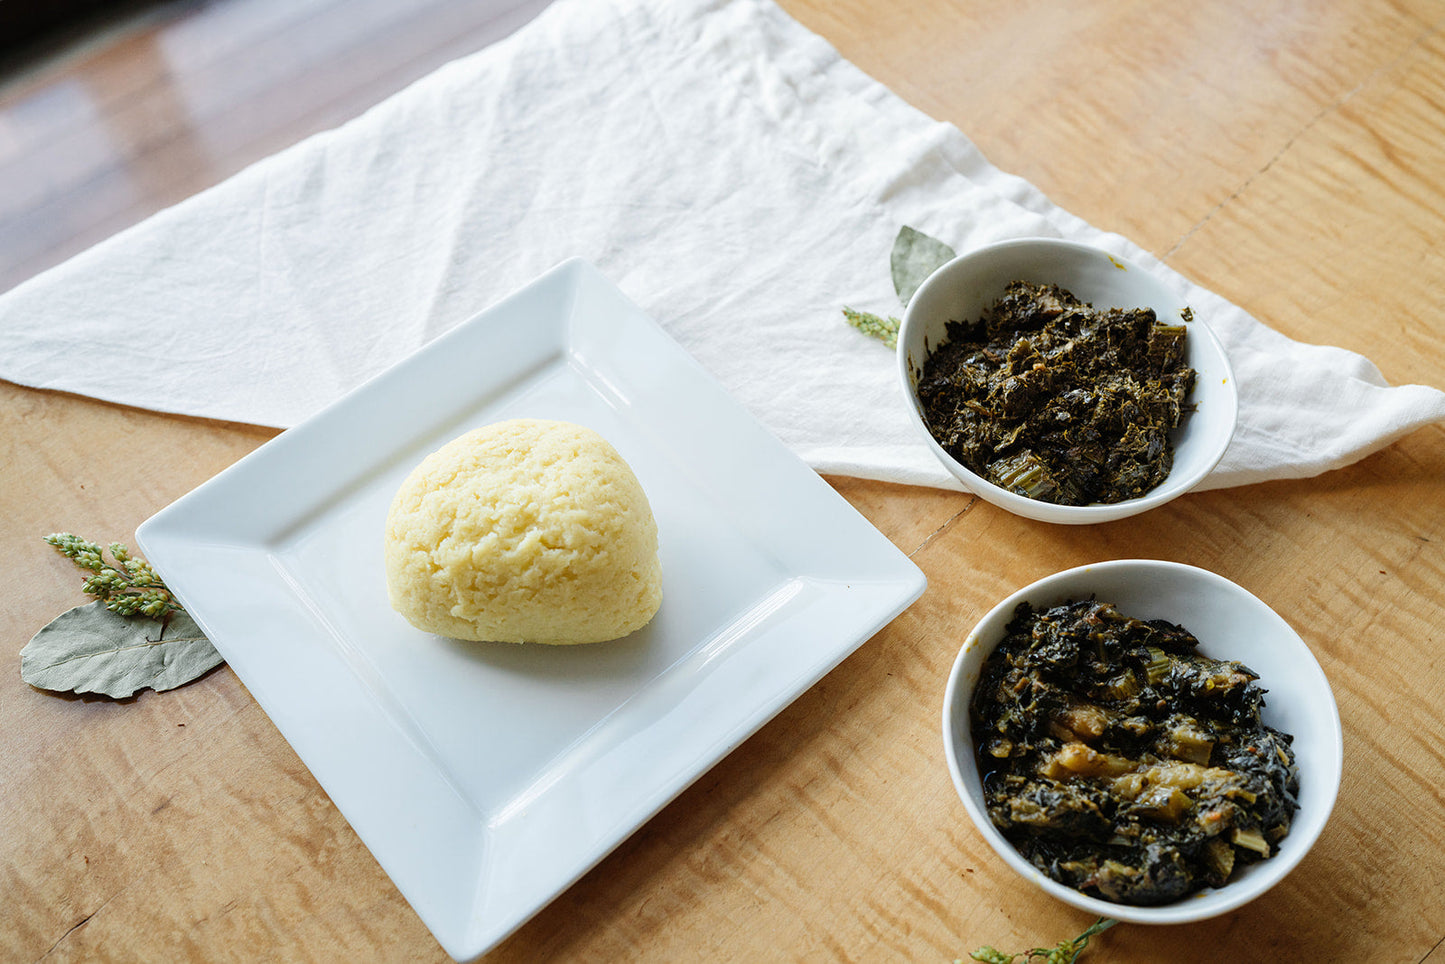 Saturday, April 27th  4:30-6:00 p.m : Fufu, Sombe, and Beignets Cooking Class